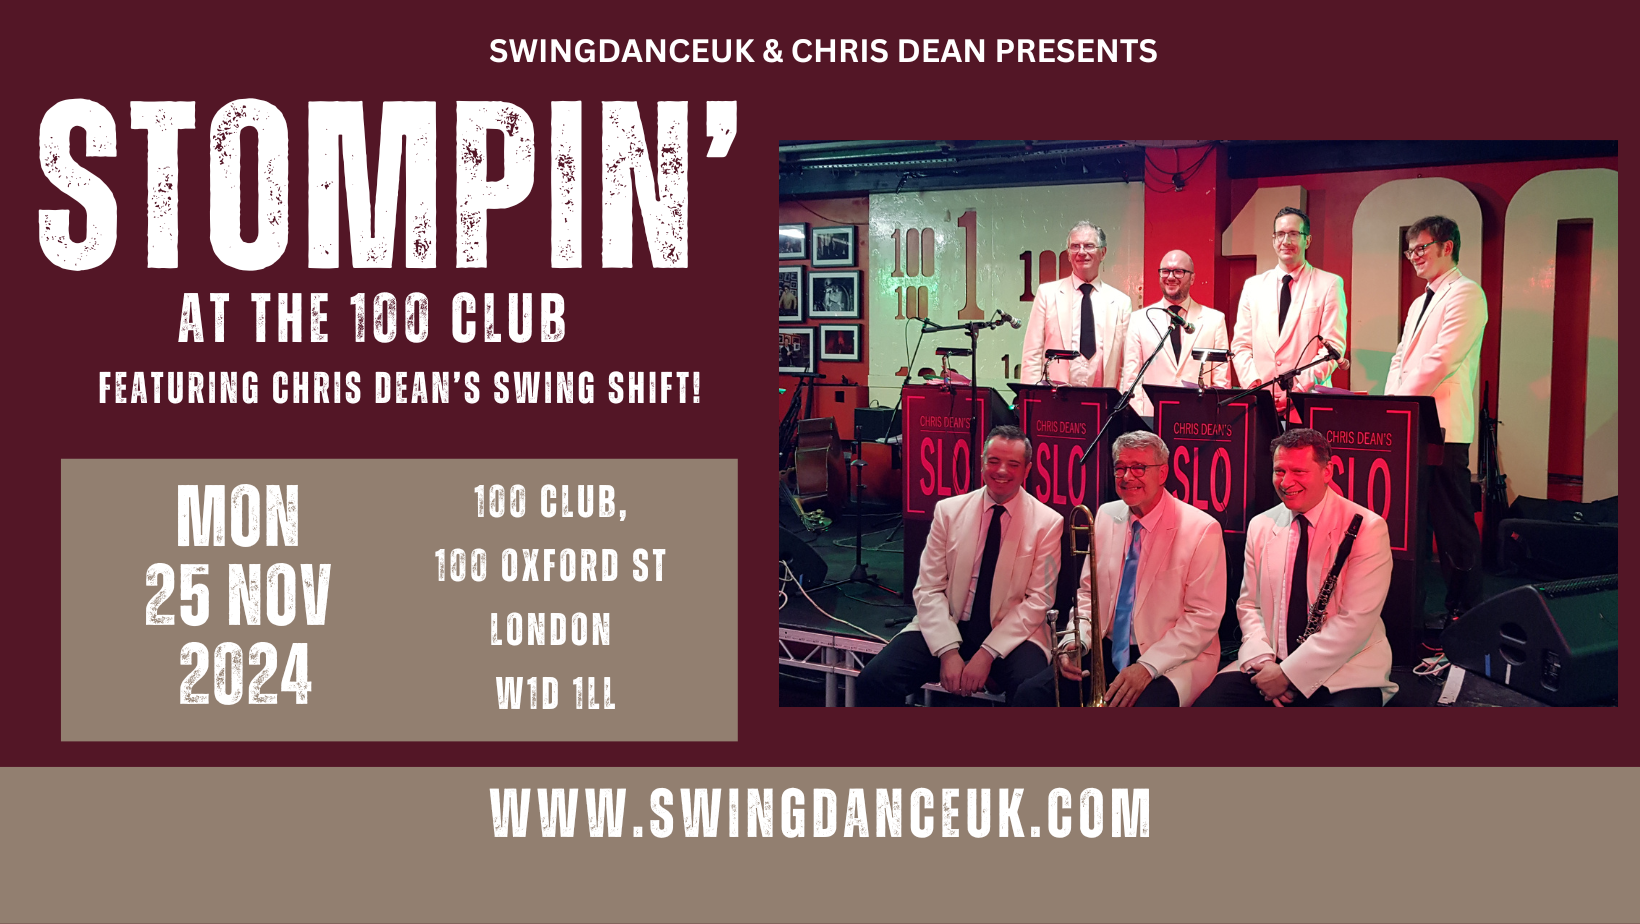 Stompin' at the 100 Club 25 Nov 2024 featuring Chris Dean's Swing Shift!